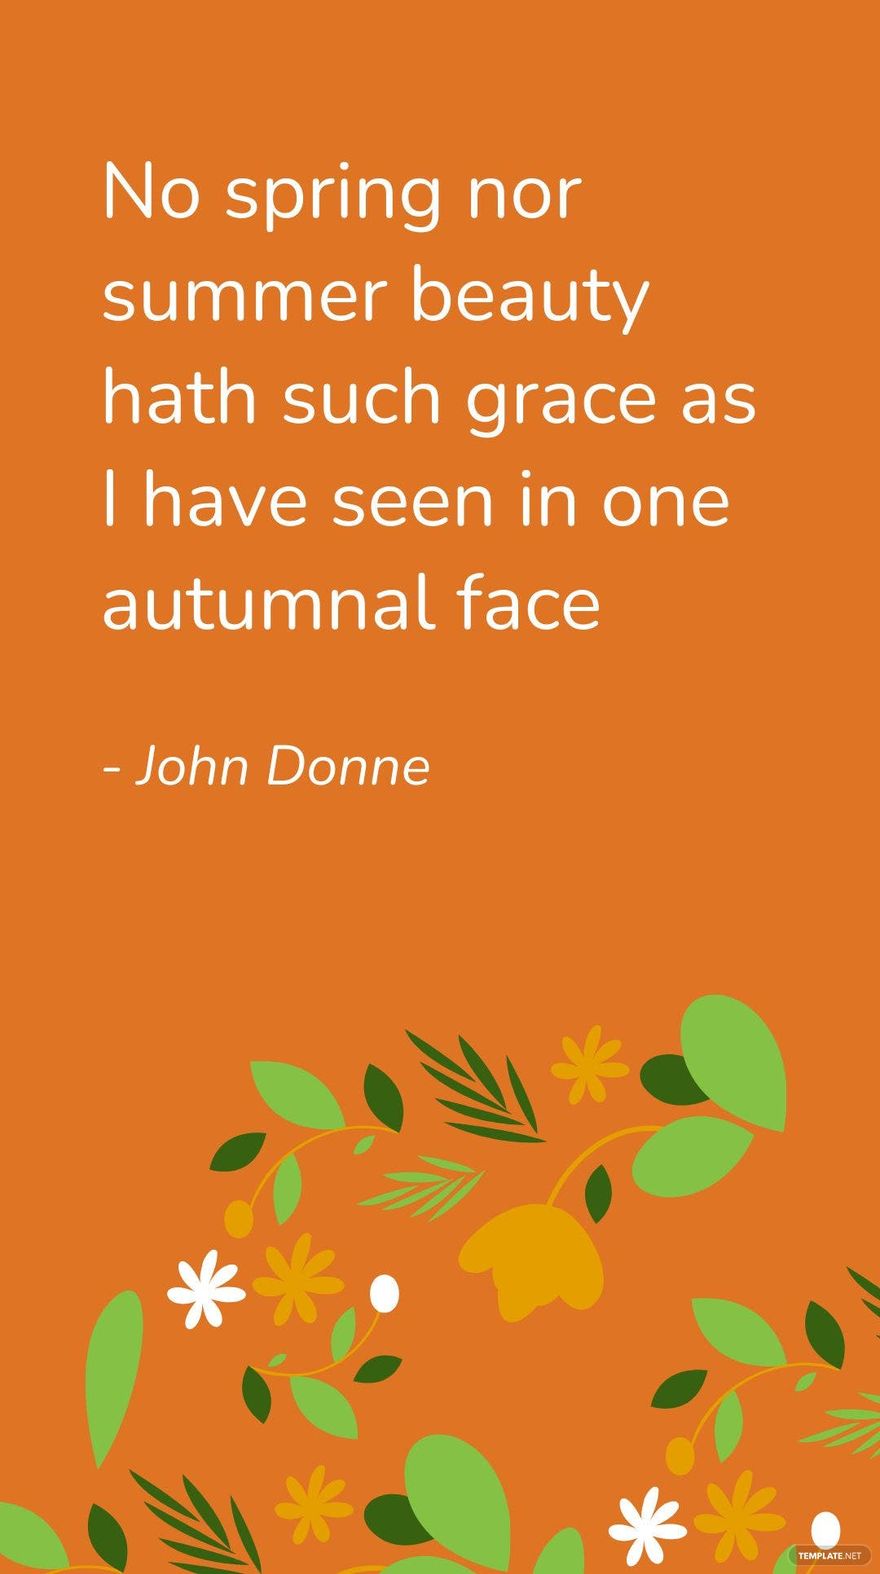 John Donne - No spring nor summer beauty hath such grace as I have seen in one autumnal face